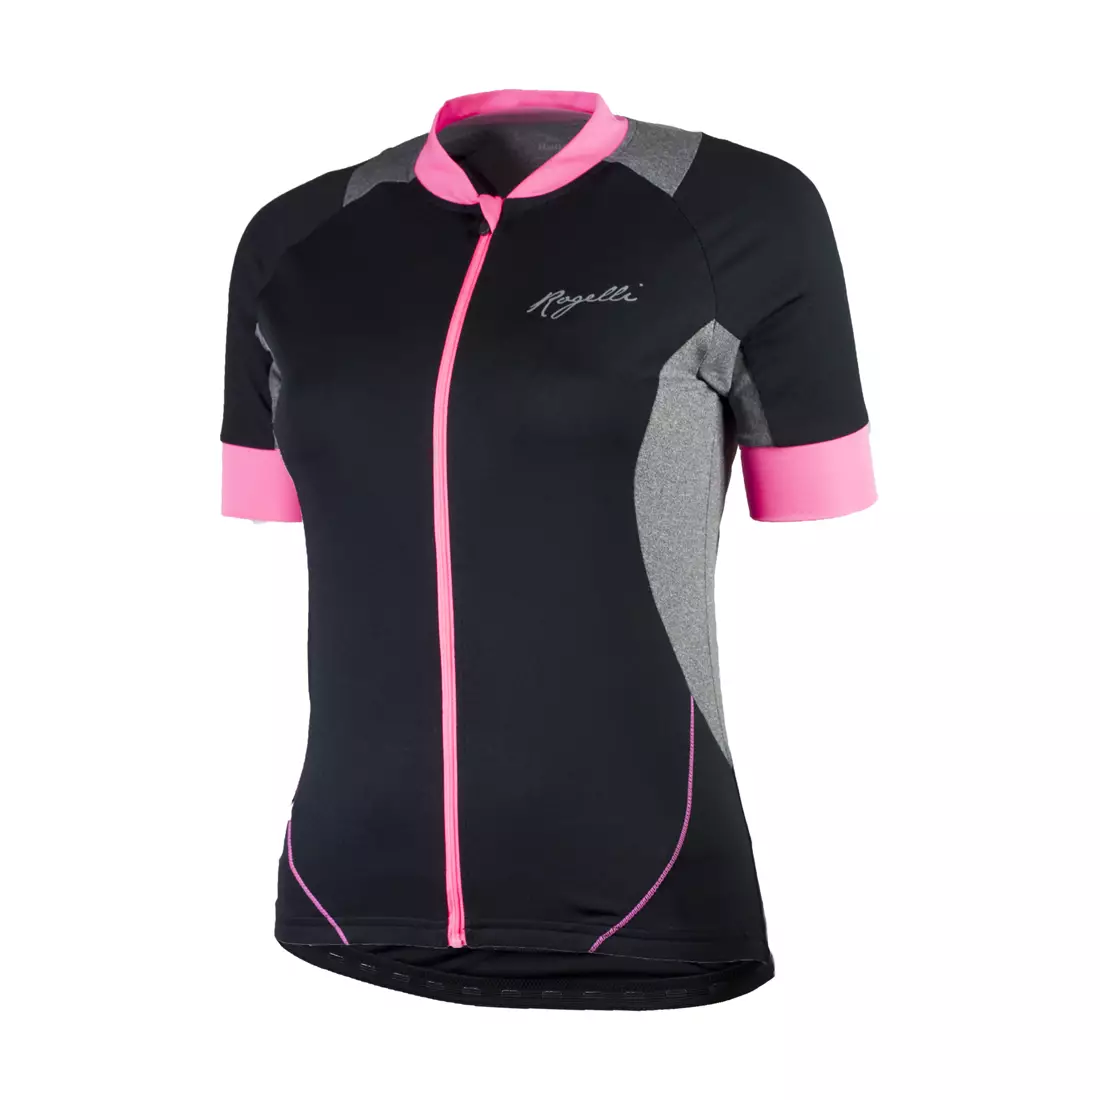 ROGELLI CARLYN - women's cycling jersey 010.026, black and pink